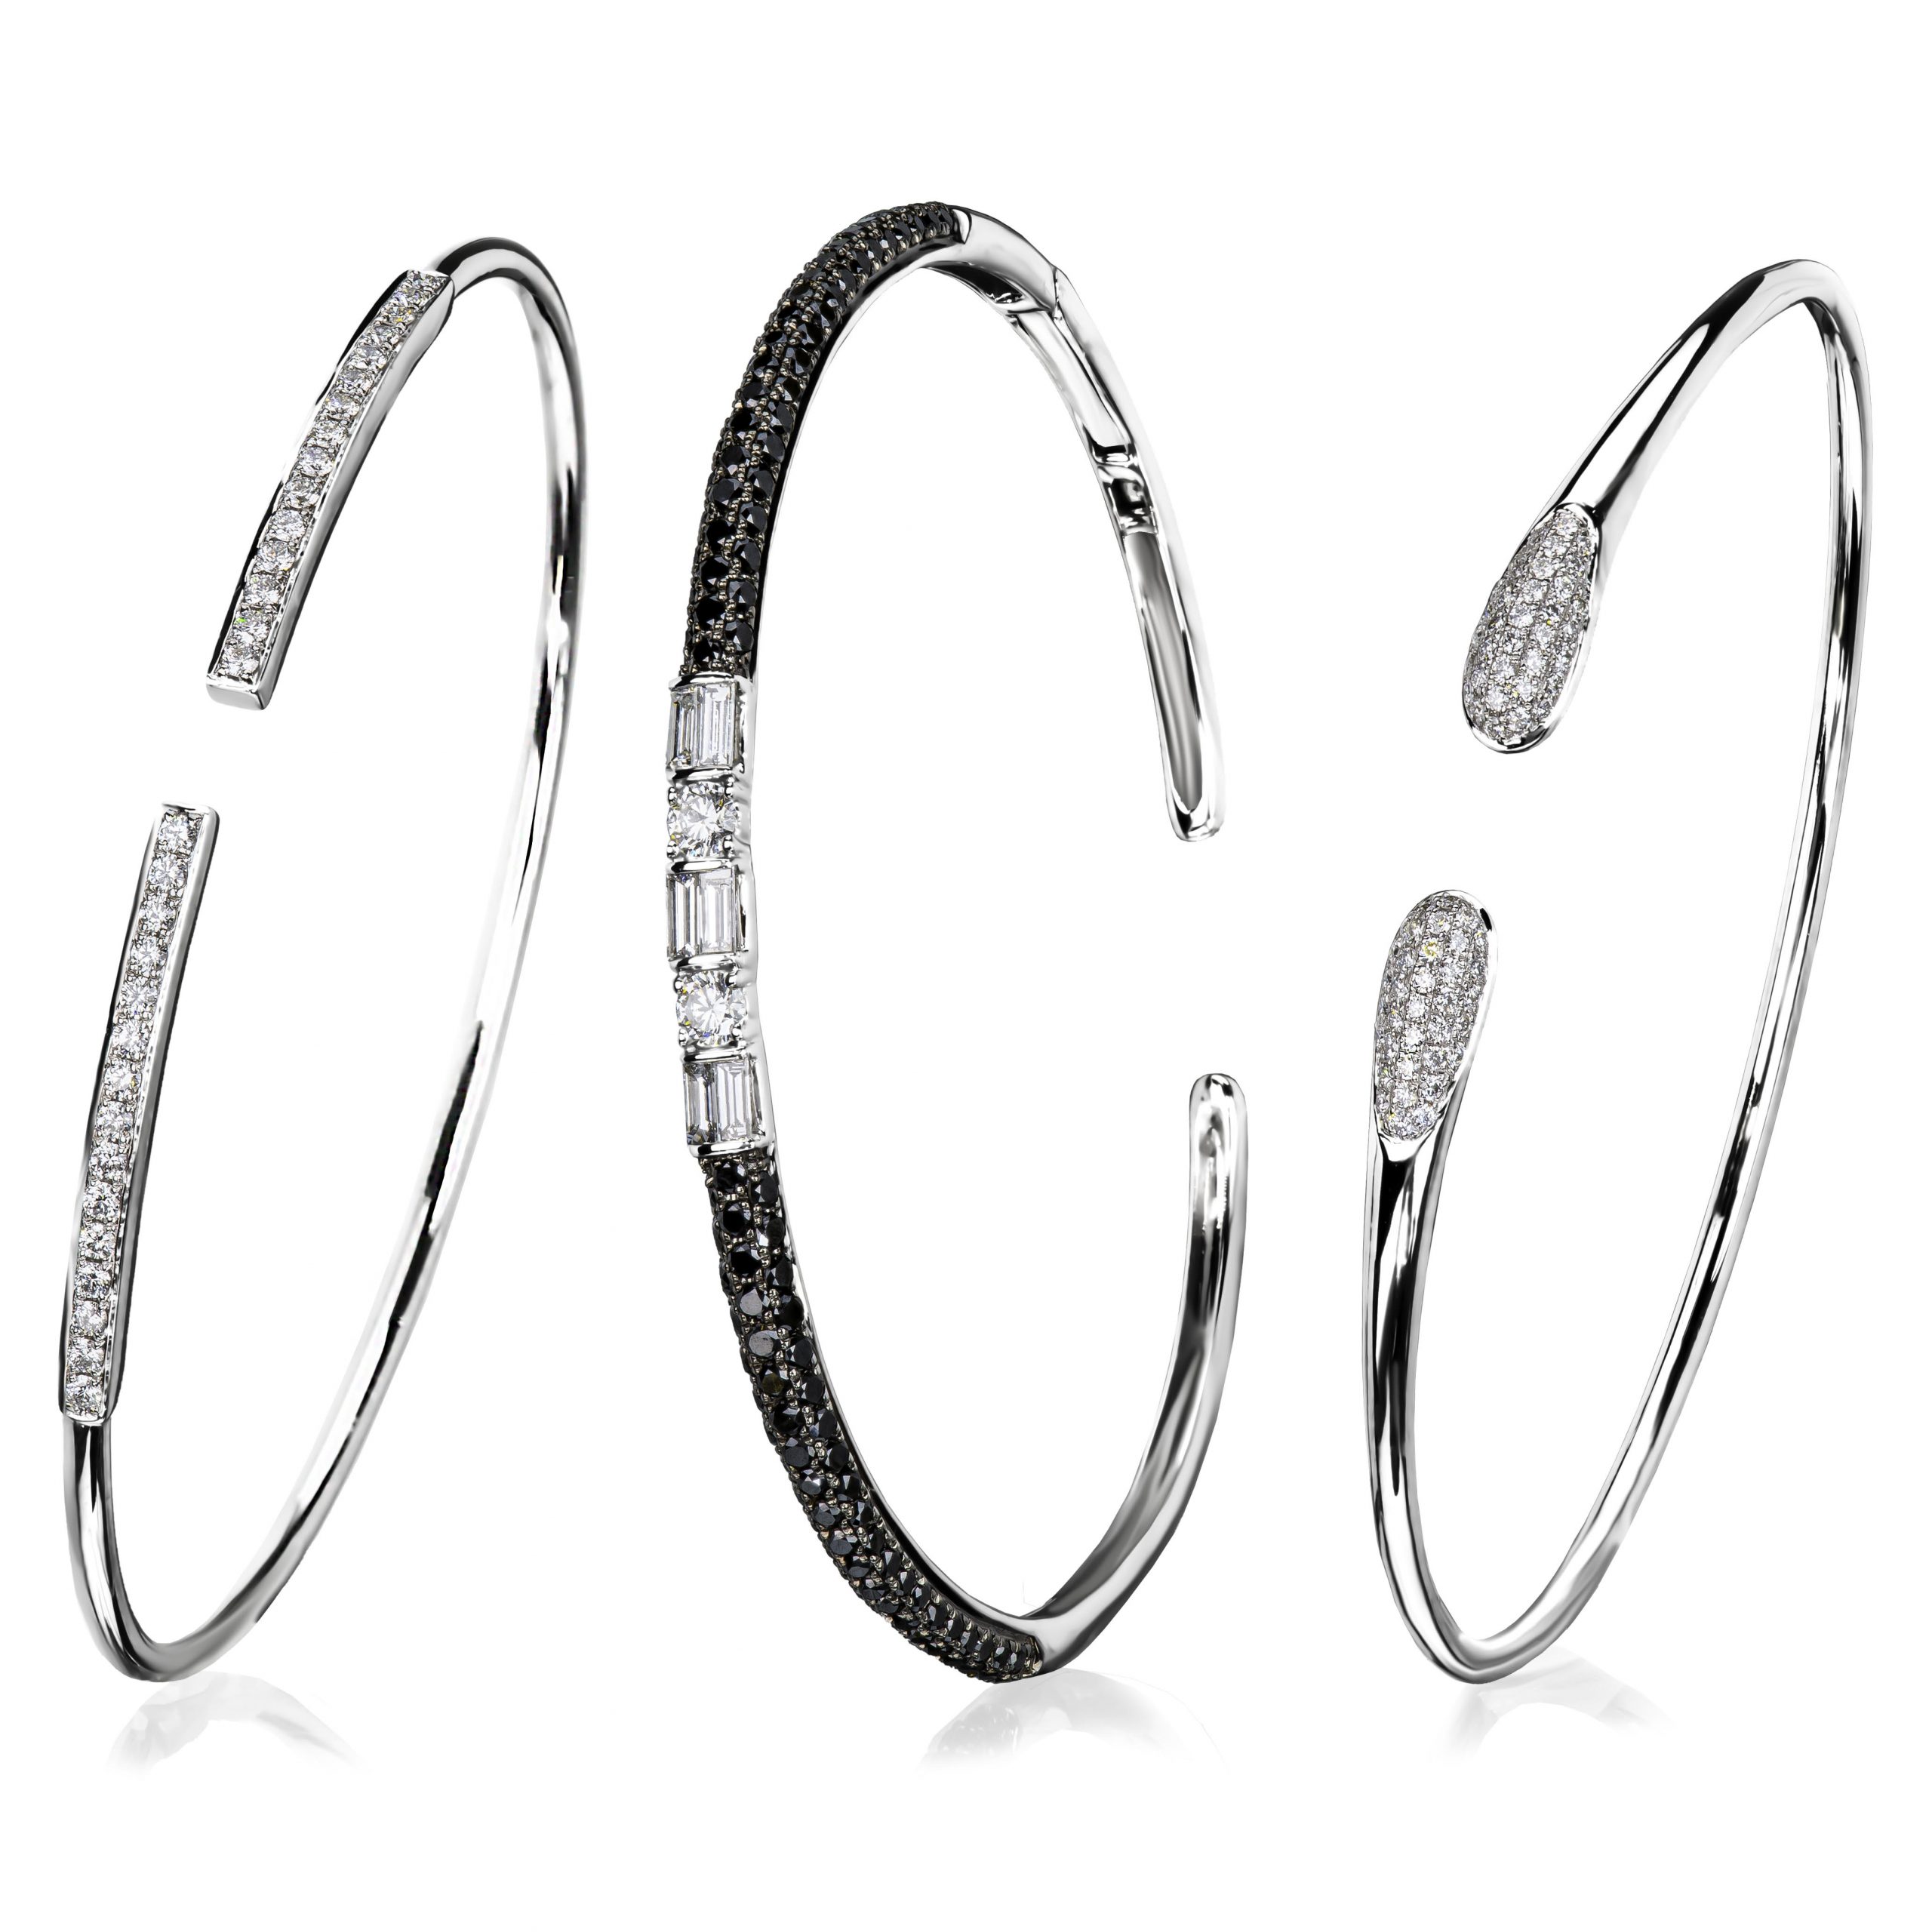 Up To 81% Off on Multi Color Crystal Hoop Earr... | Groupon Goods